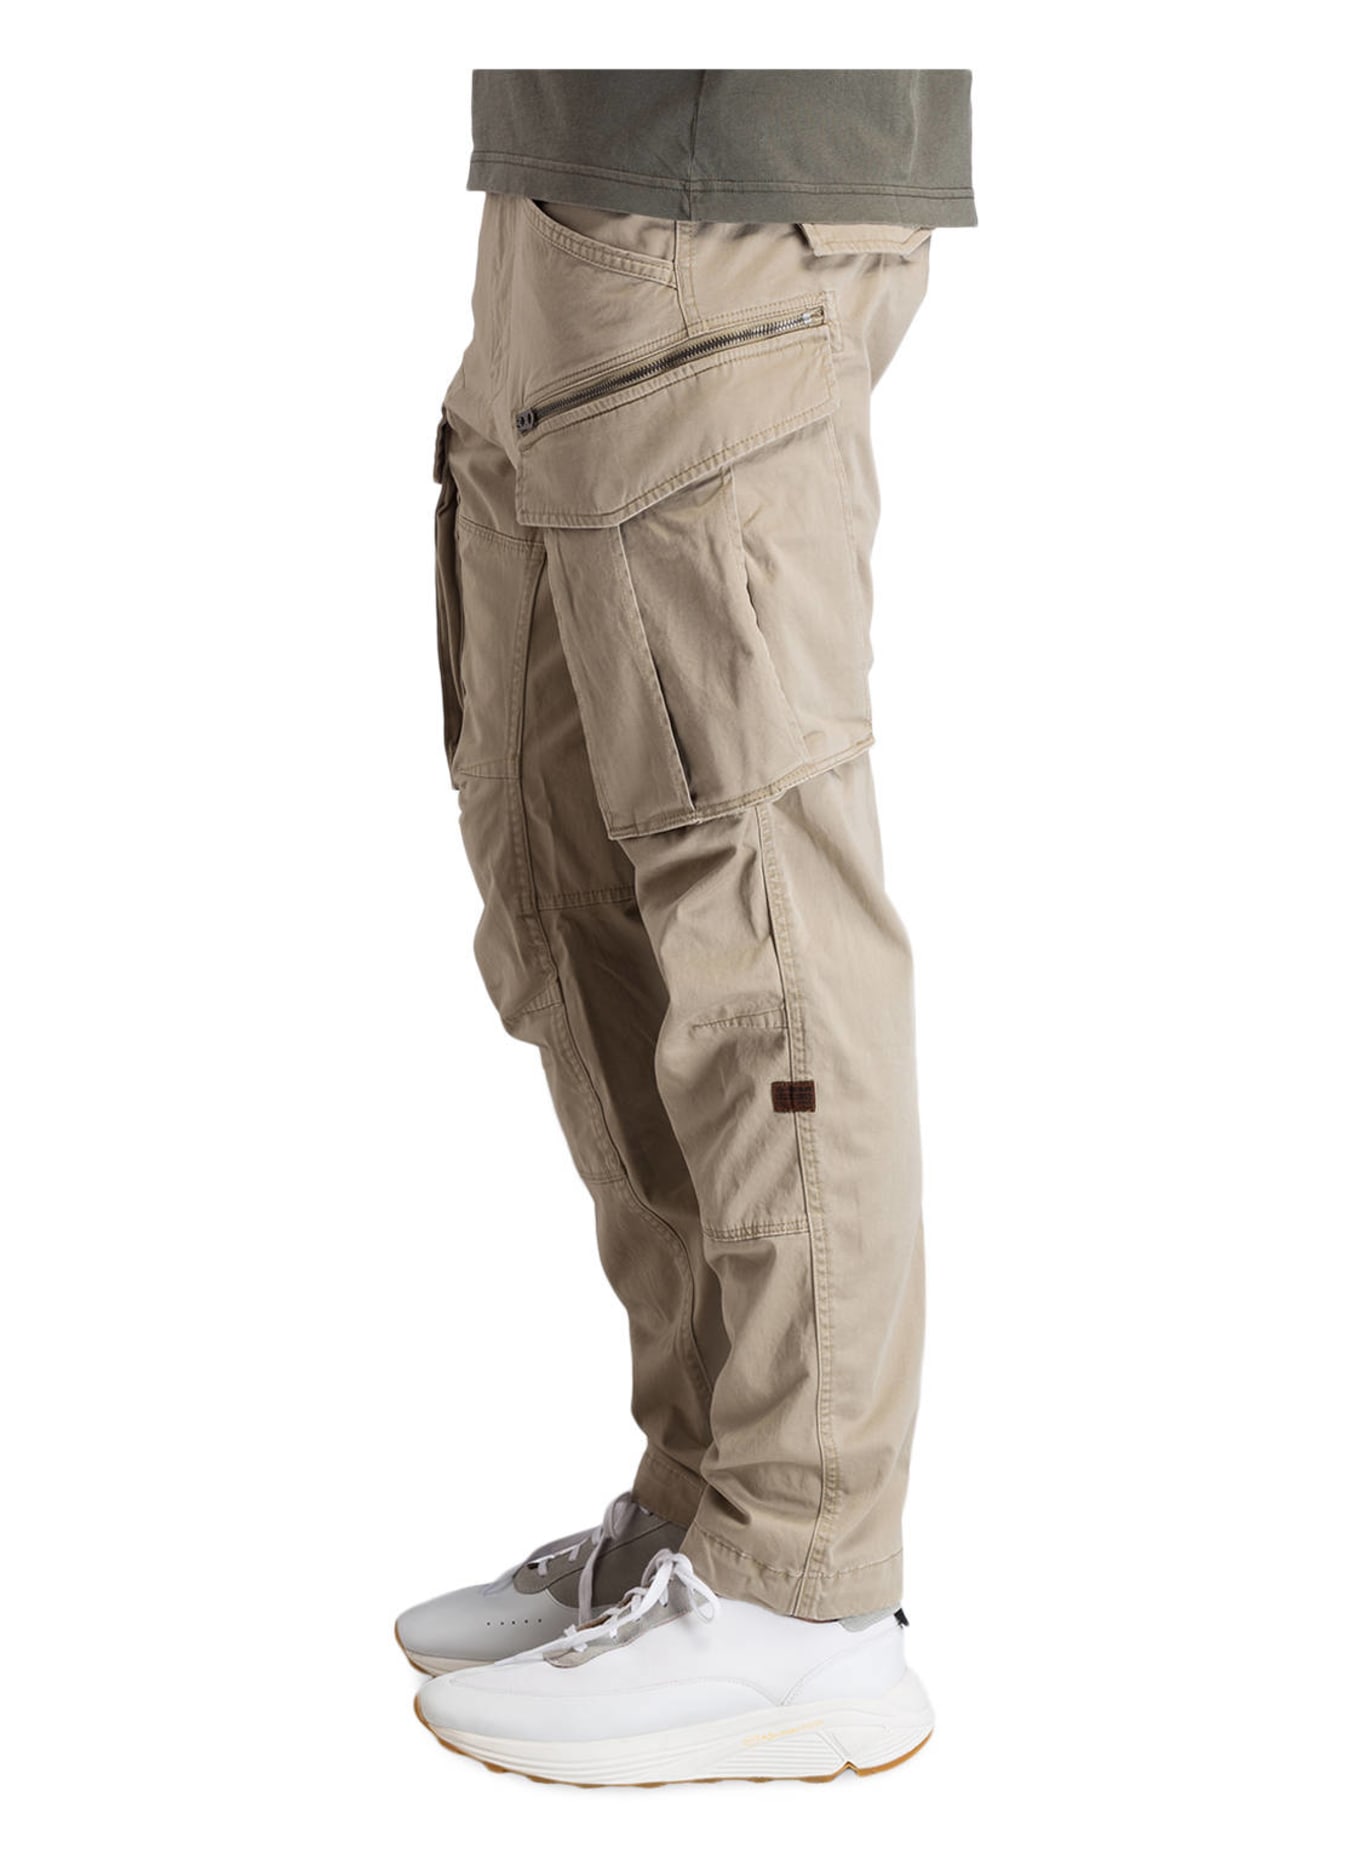 G-Star RAW Cargo pants tapered fit, Color: BEIGE (Image 4)